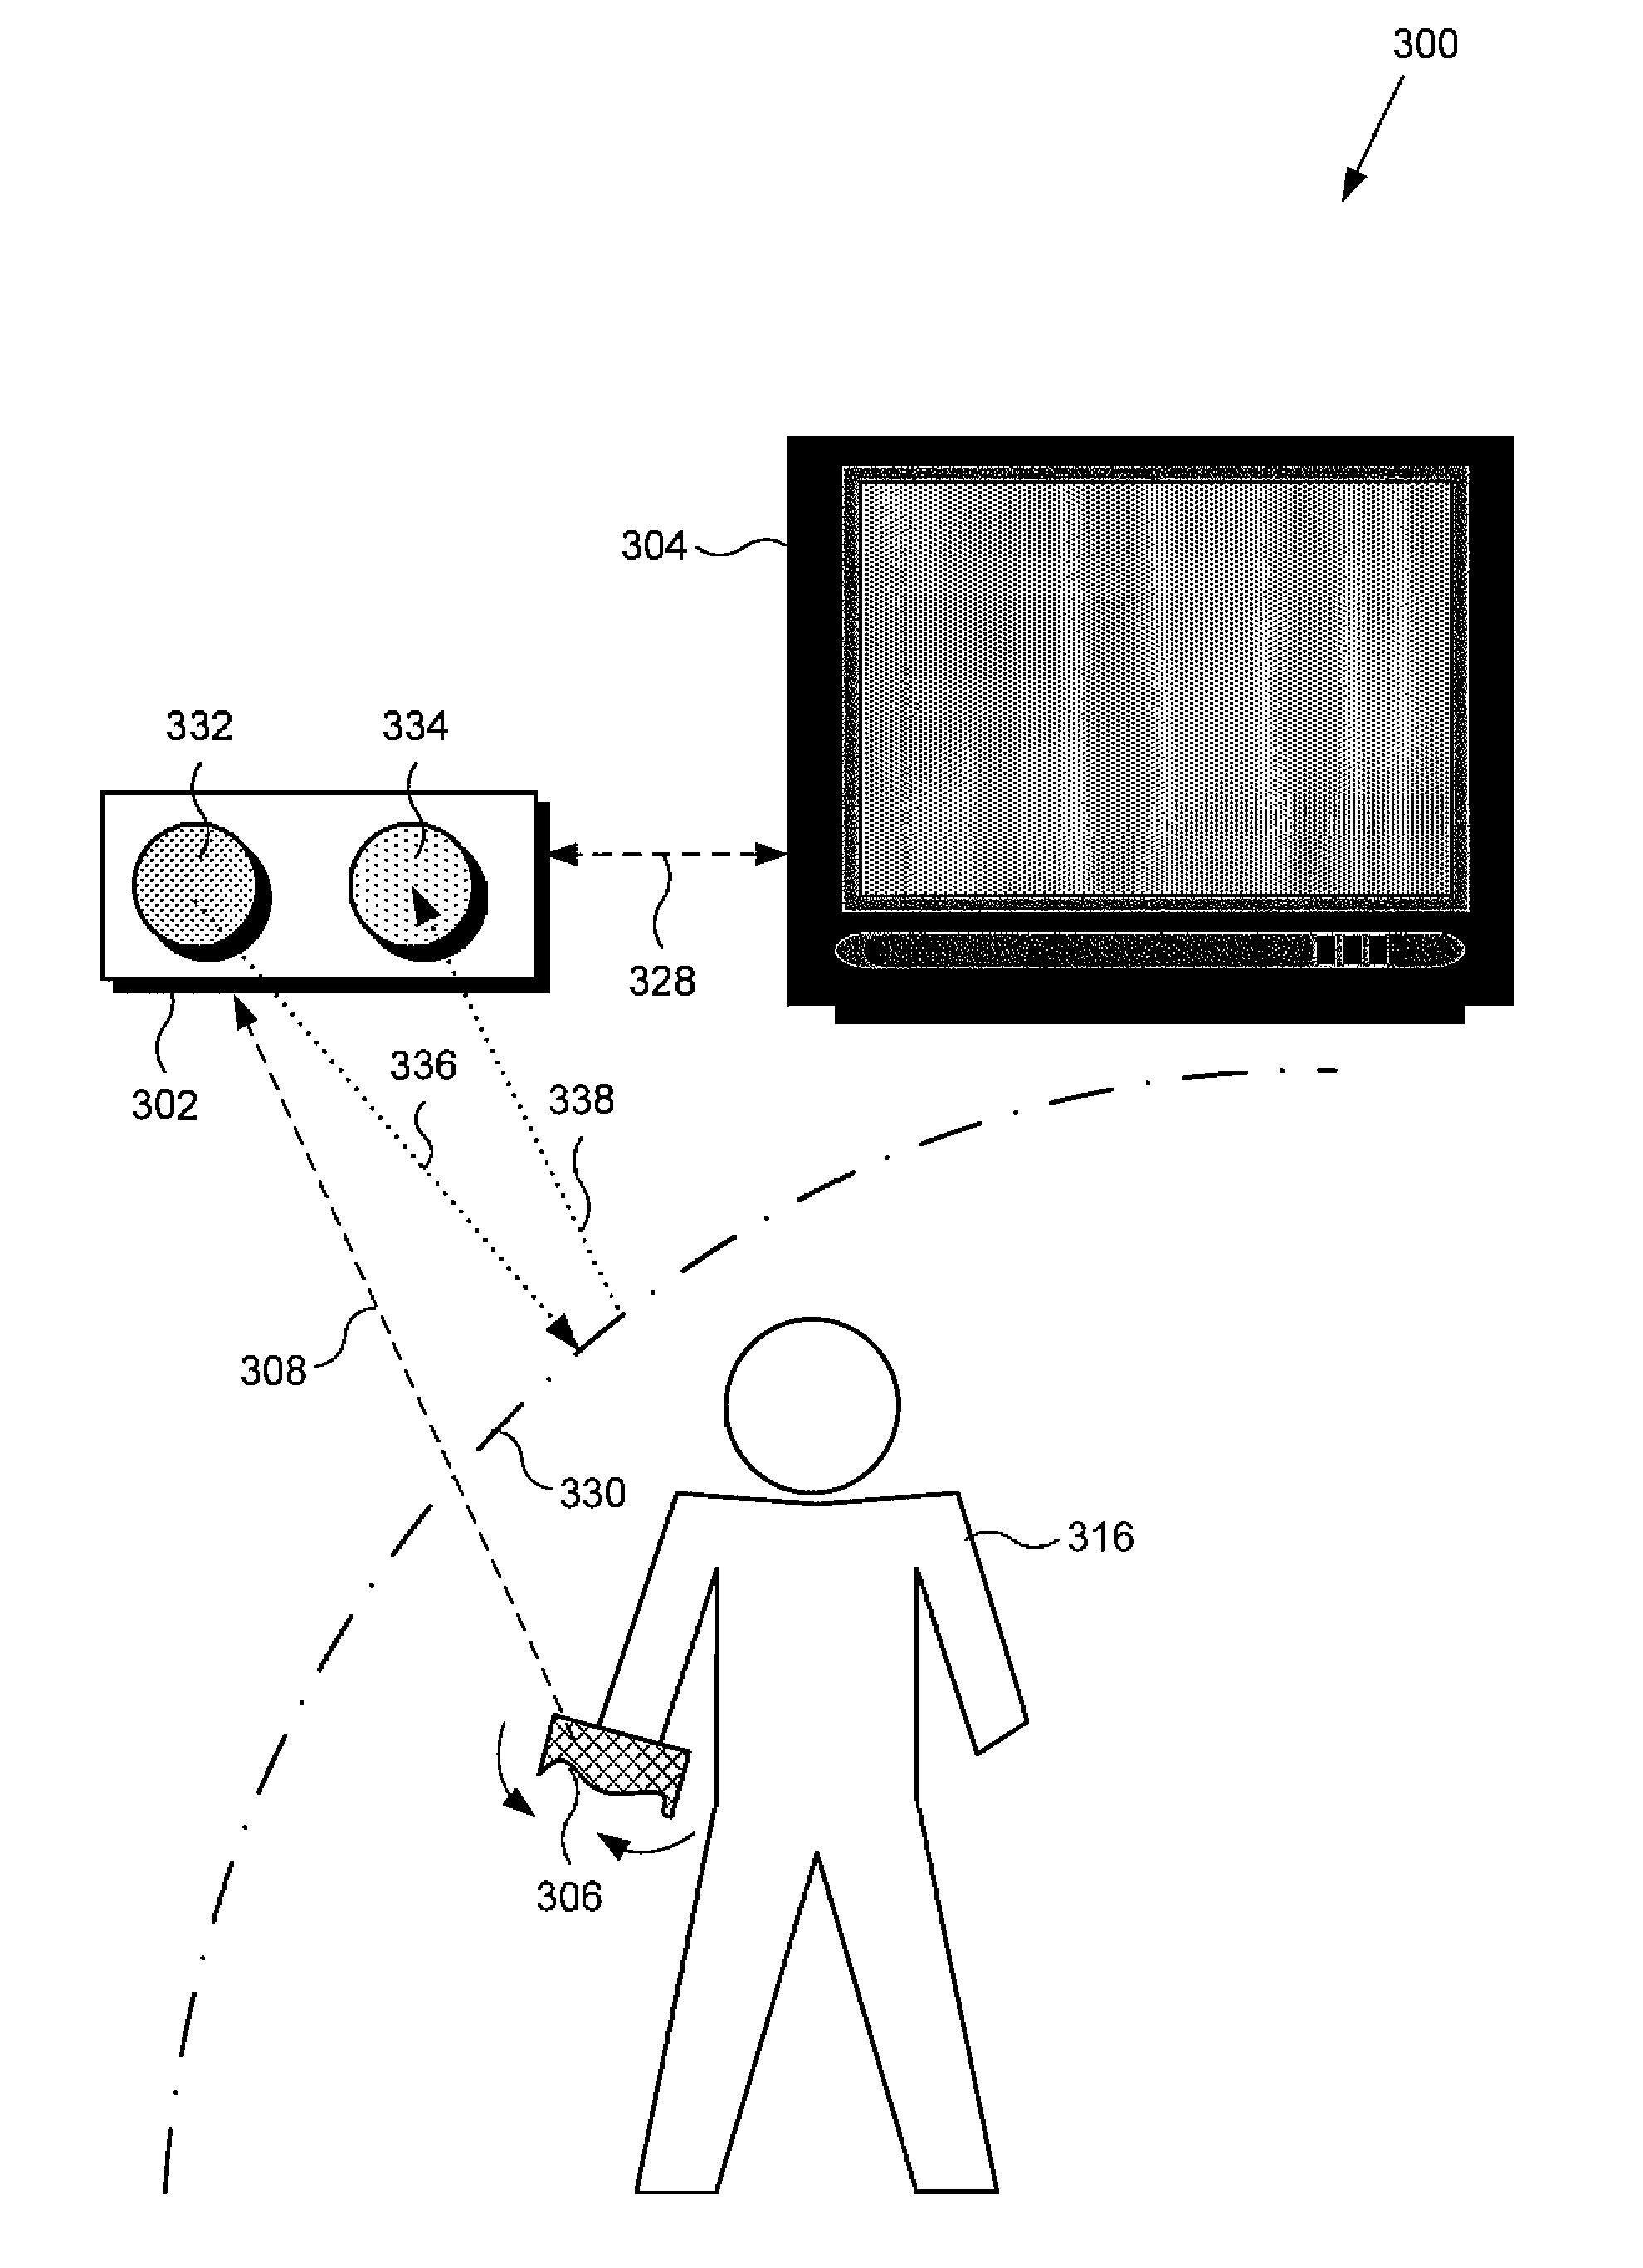 Systems and Methods for Providing Enhanced Motion Detection